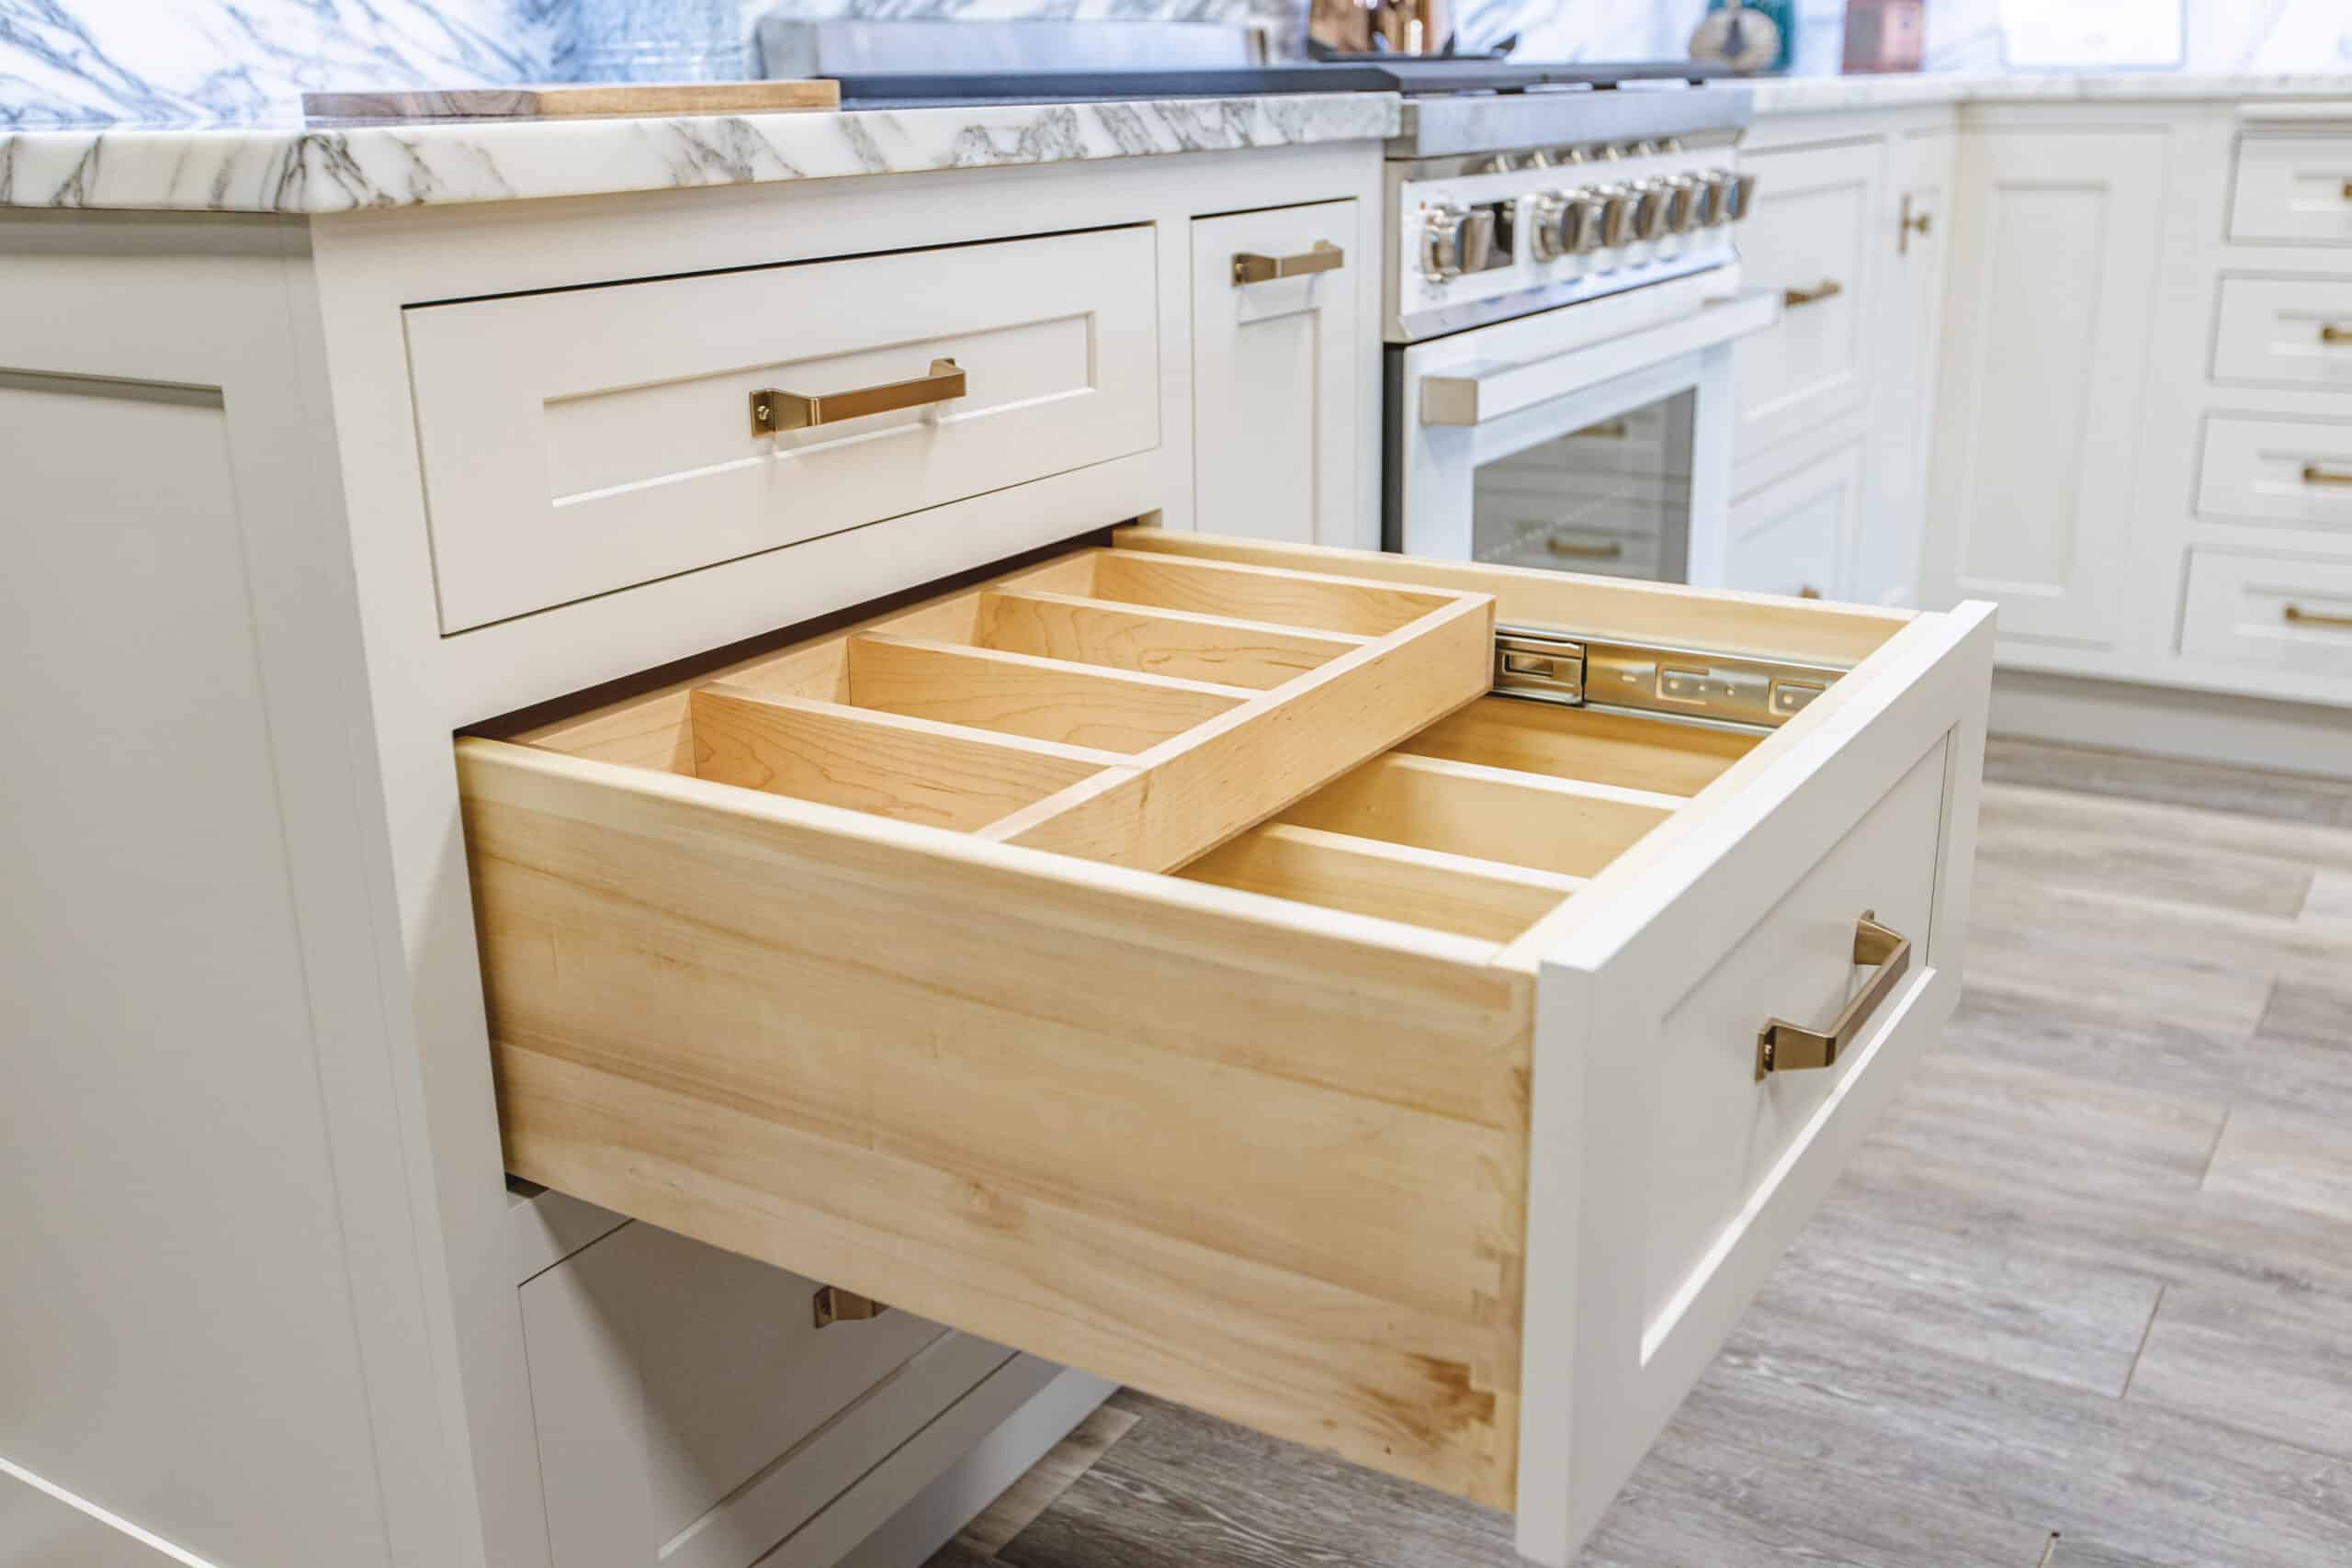 A kitchen drawer with multiple compartments